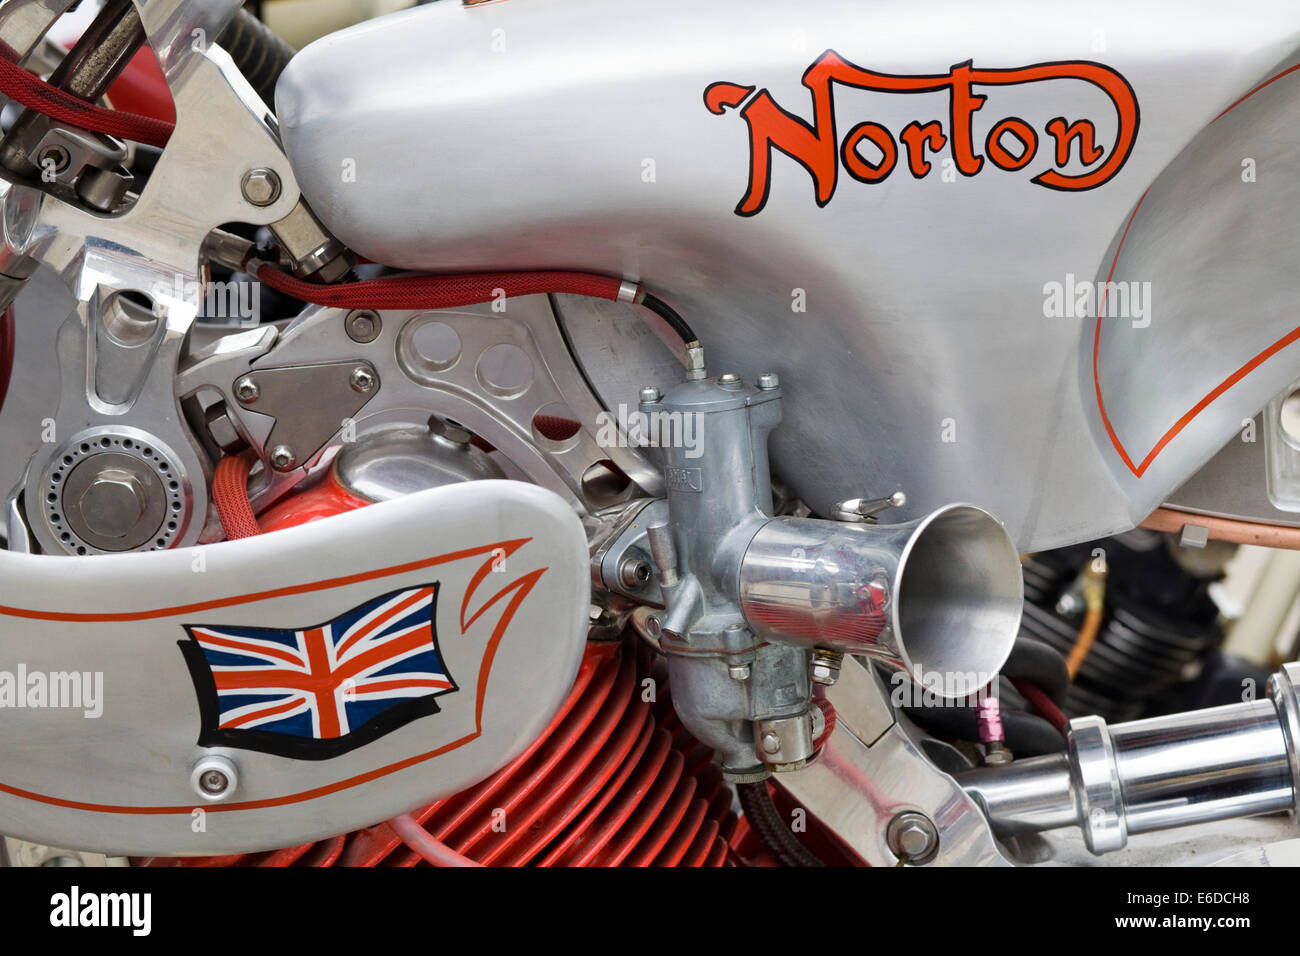 Abstract view of a Norton Motorcycle Stock Photo